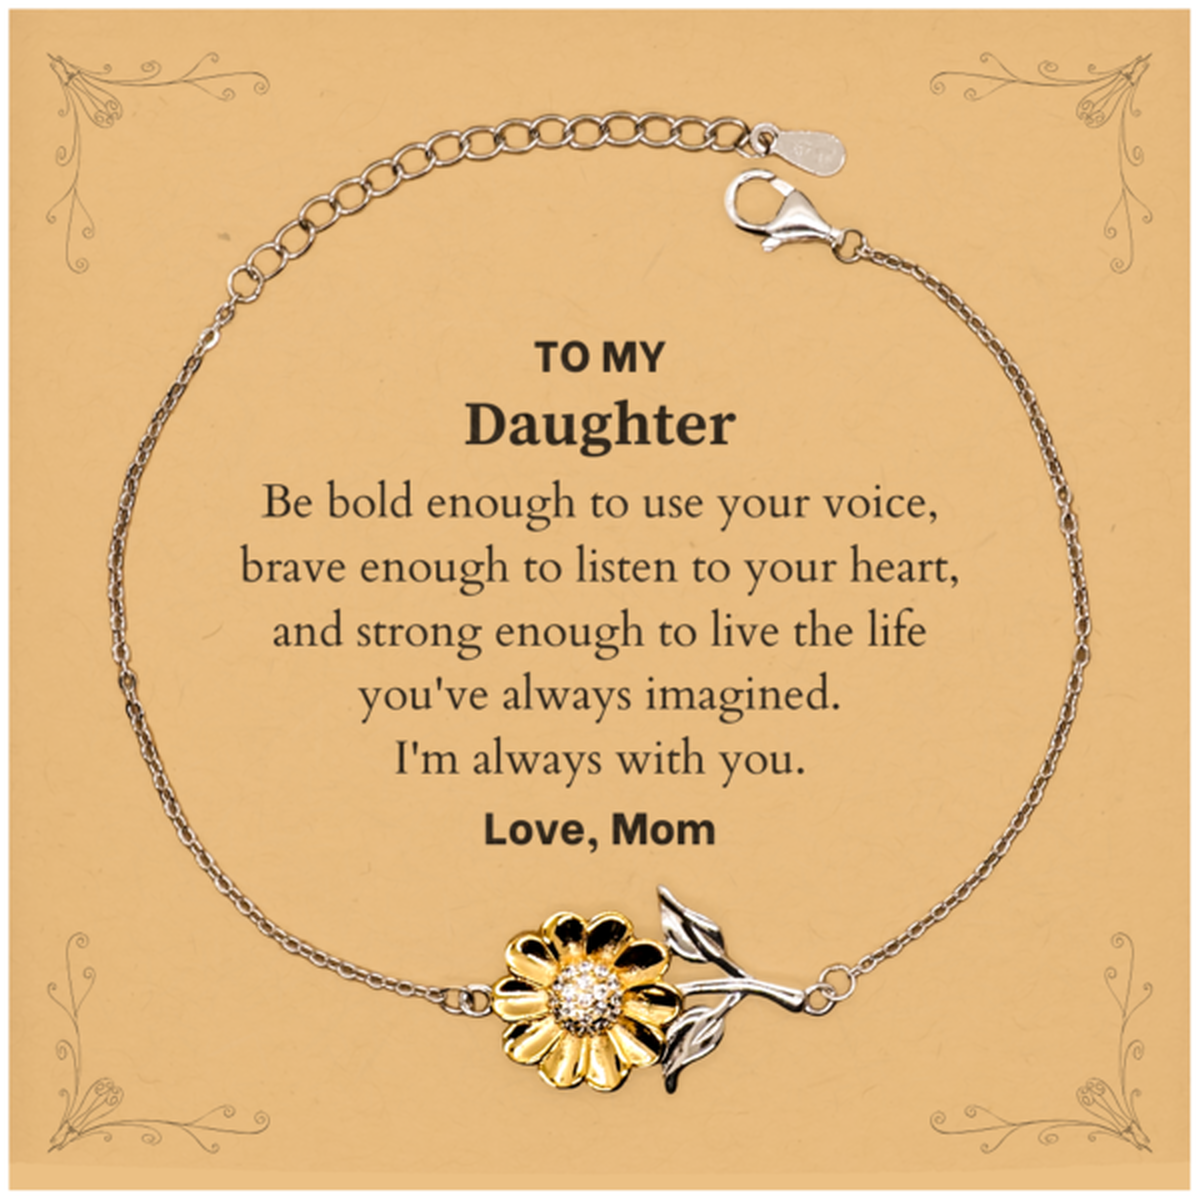 Keepsake Daughter Sunflower Bracelet Gift Idea Graduation Christmas Birthday Daughter from Mom, Daughter Be bold enough to use your voice, brave enough to listen to your heart. Love, Mom